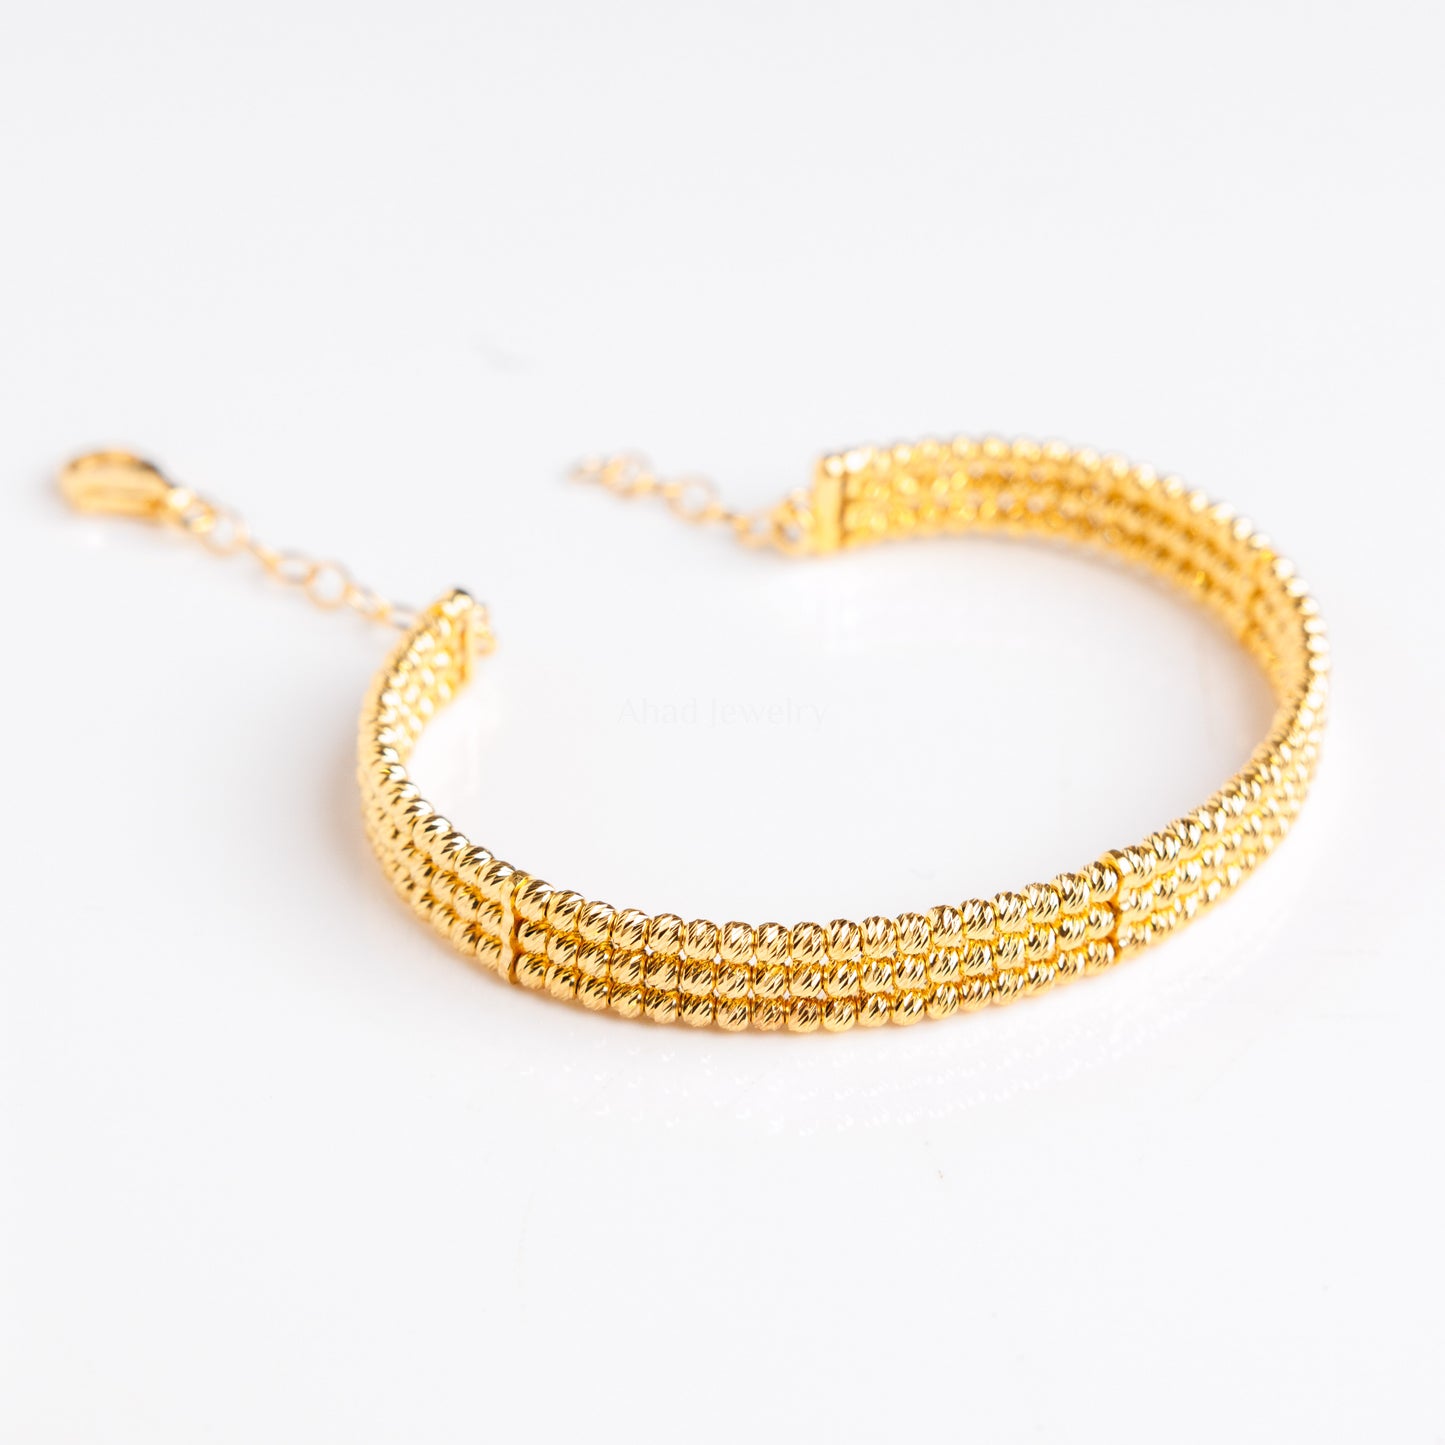 3 Line Cuff Bracelet | Silver 925 & Gold Plated